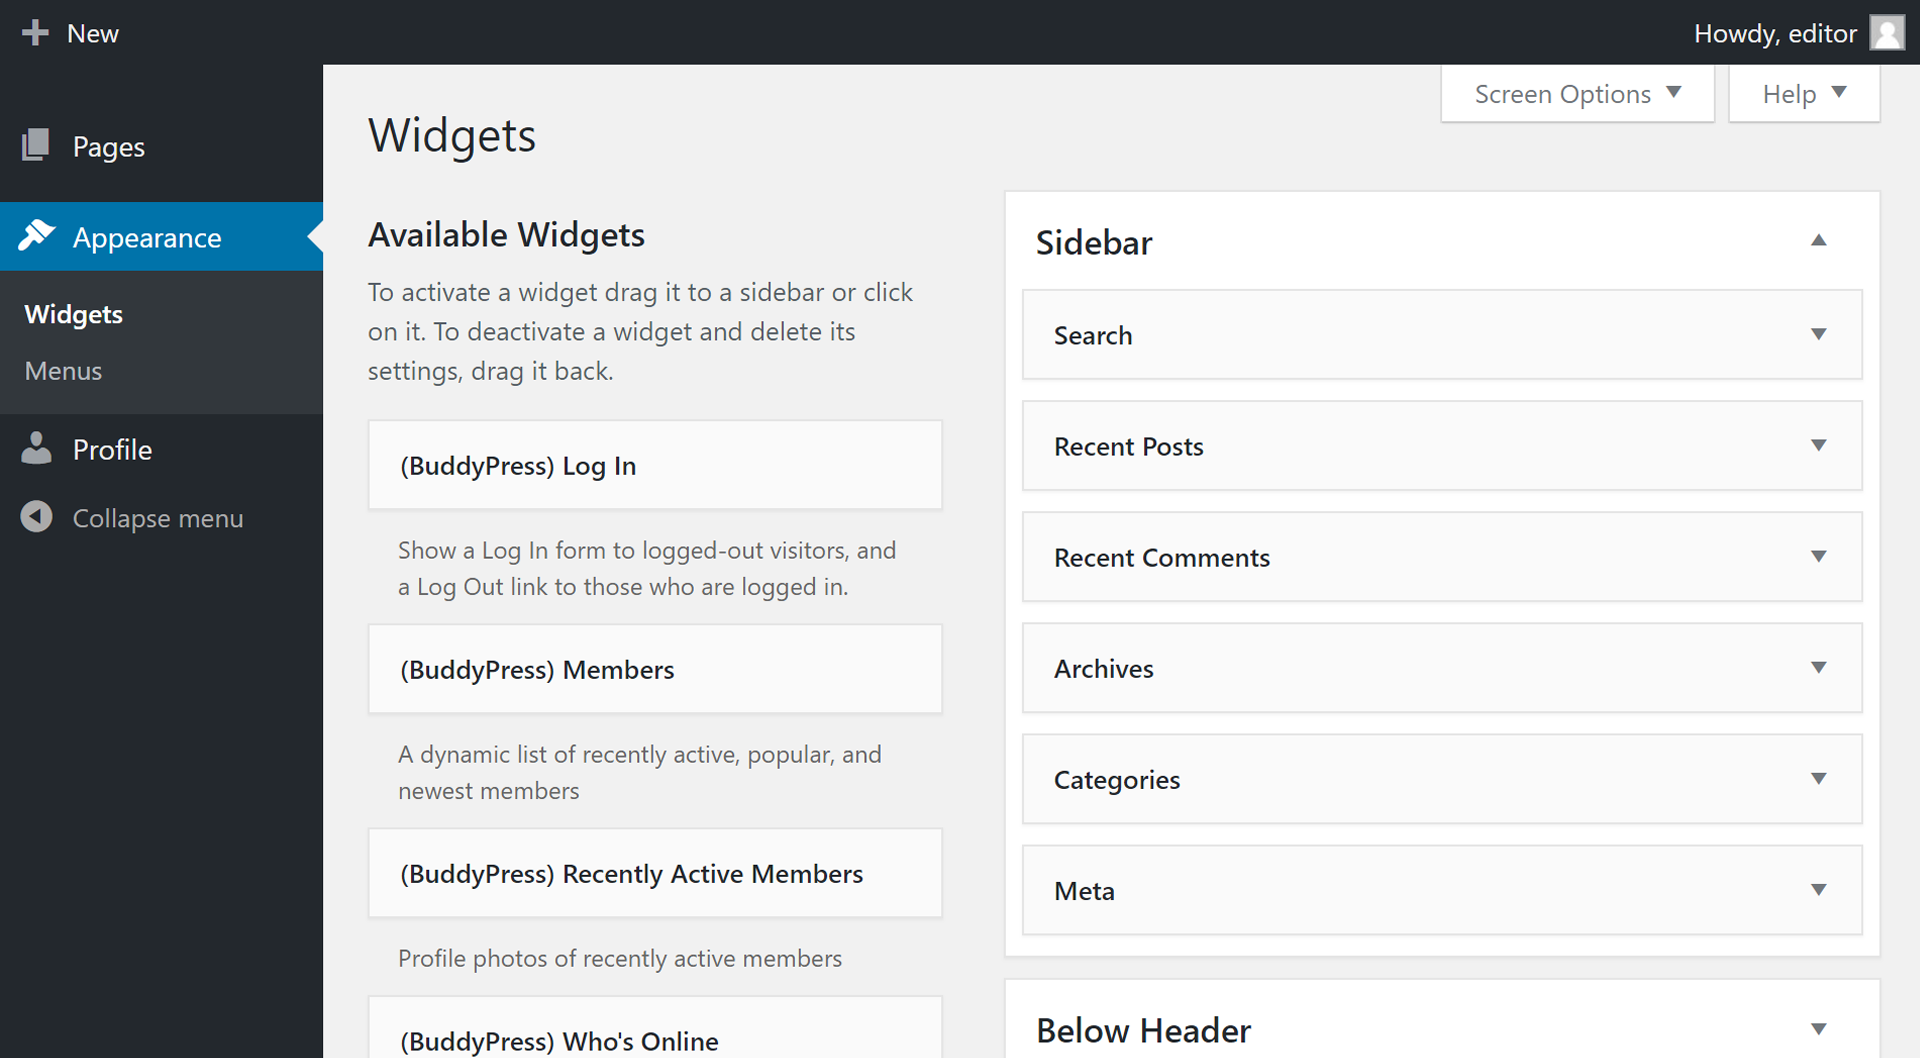 The "Widgets" page being modified by an Editor.